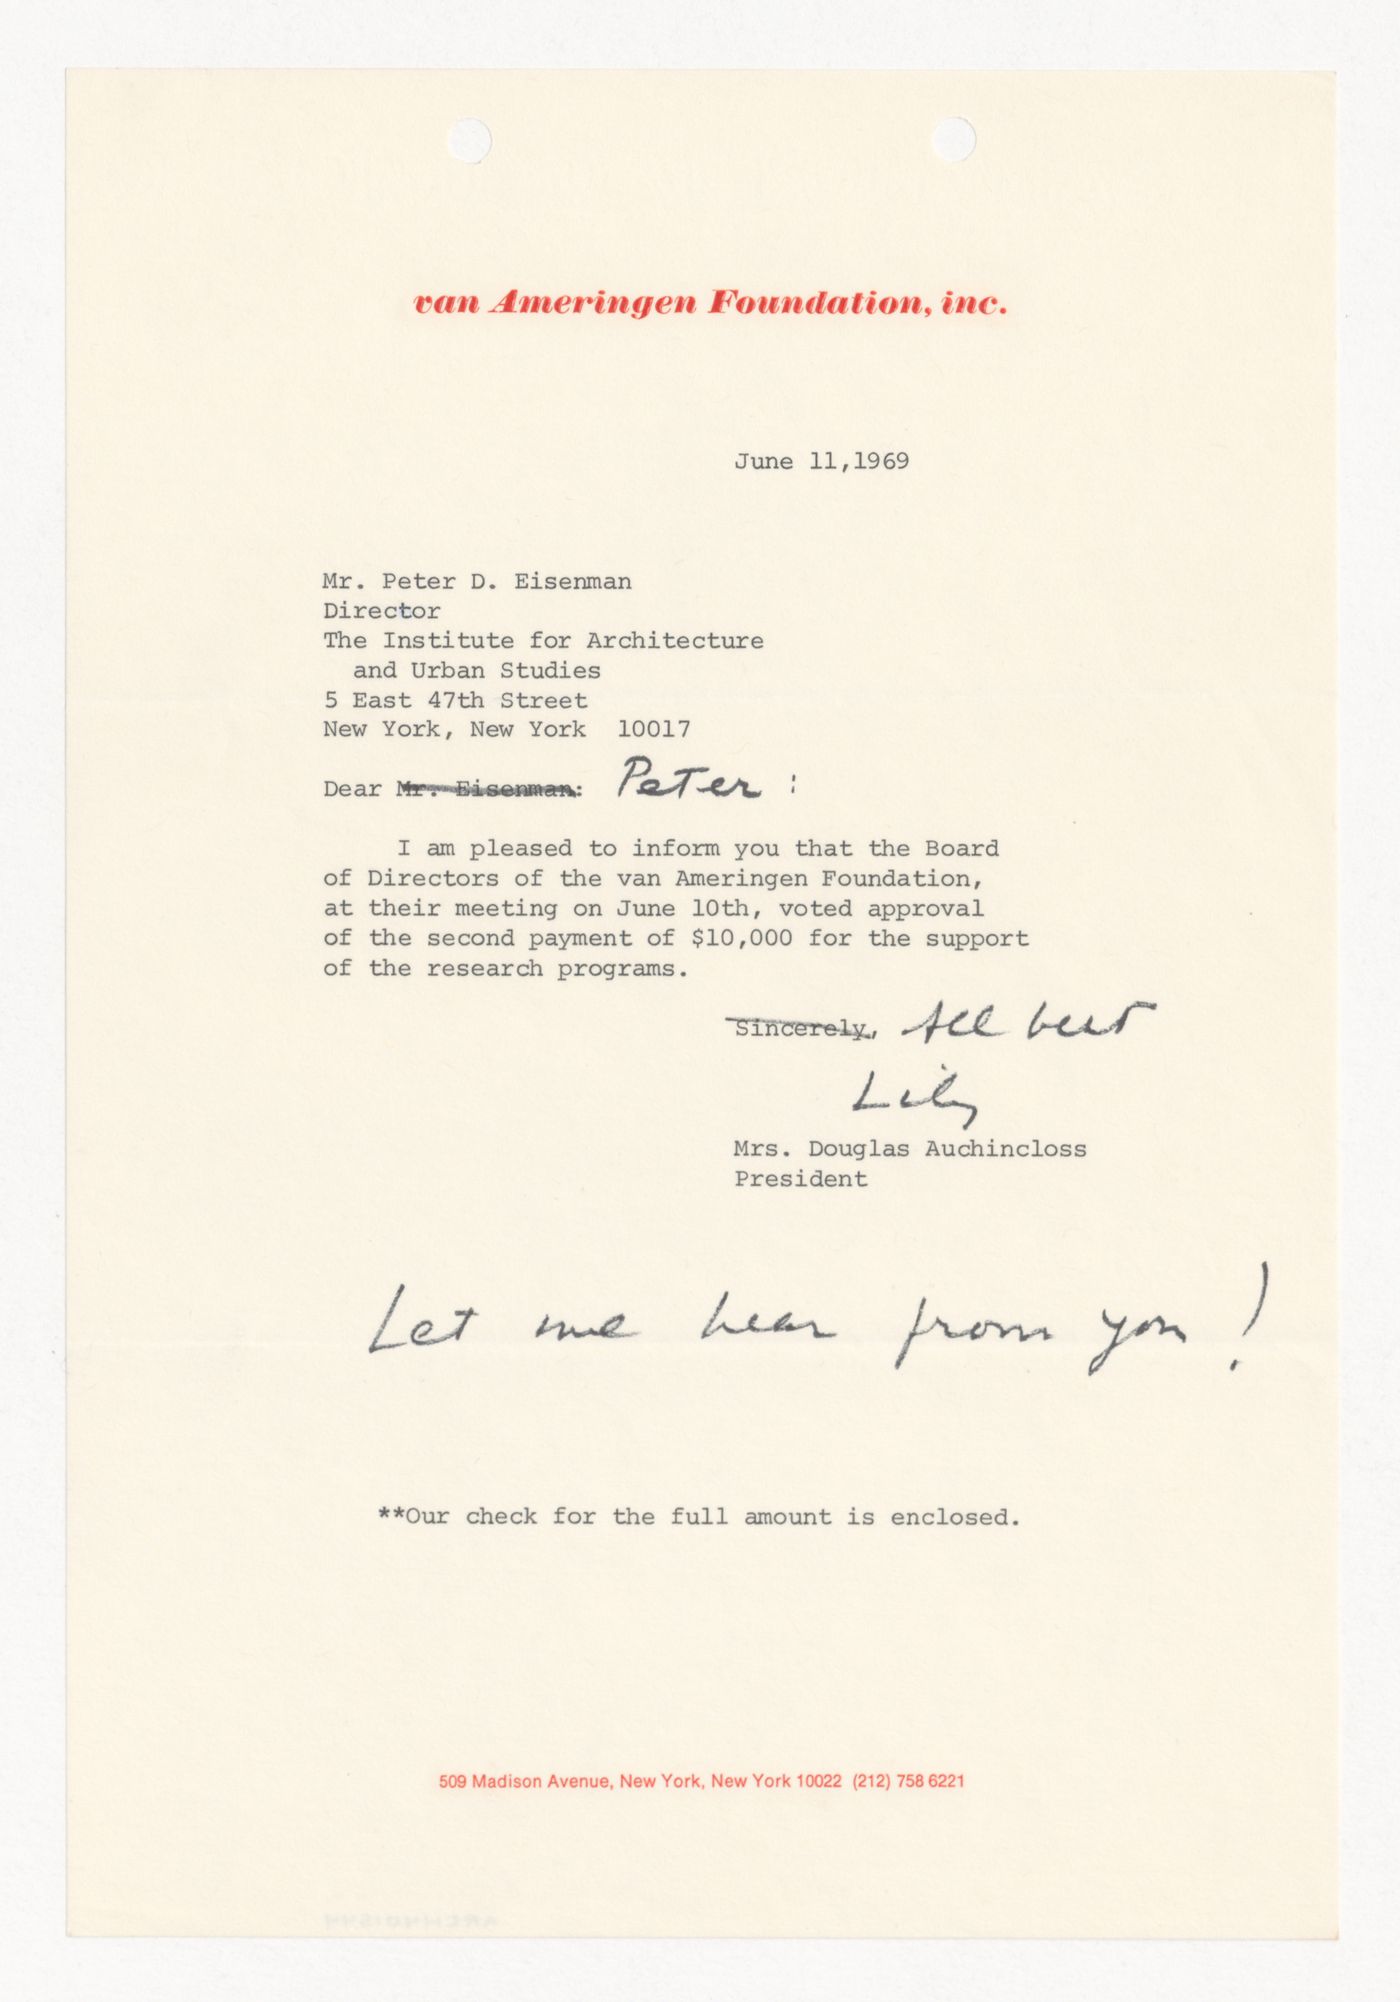 Letter from Mrs. Douglas Auchincloss to Peter D. Eisenman about a grant awarded by the van Ameringen Foundation with annotations by Auchincloss